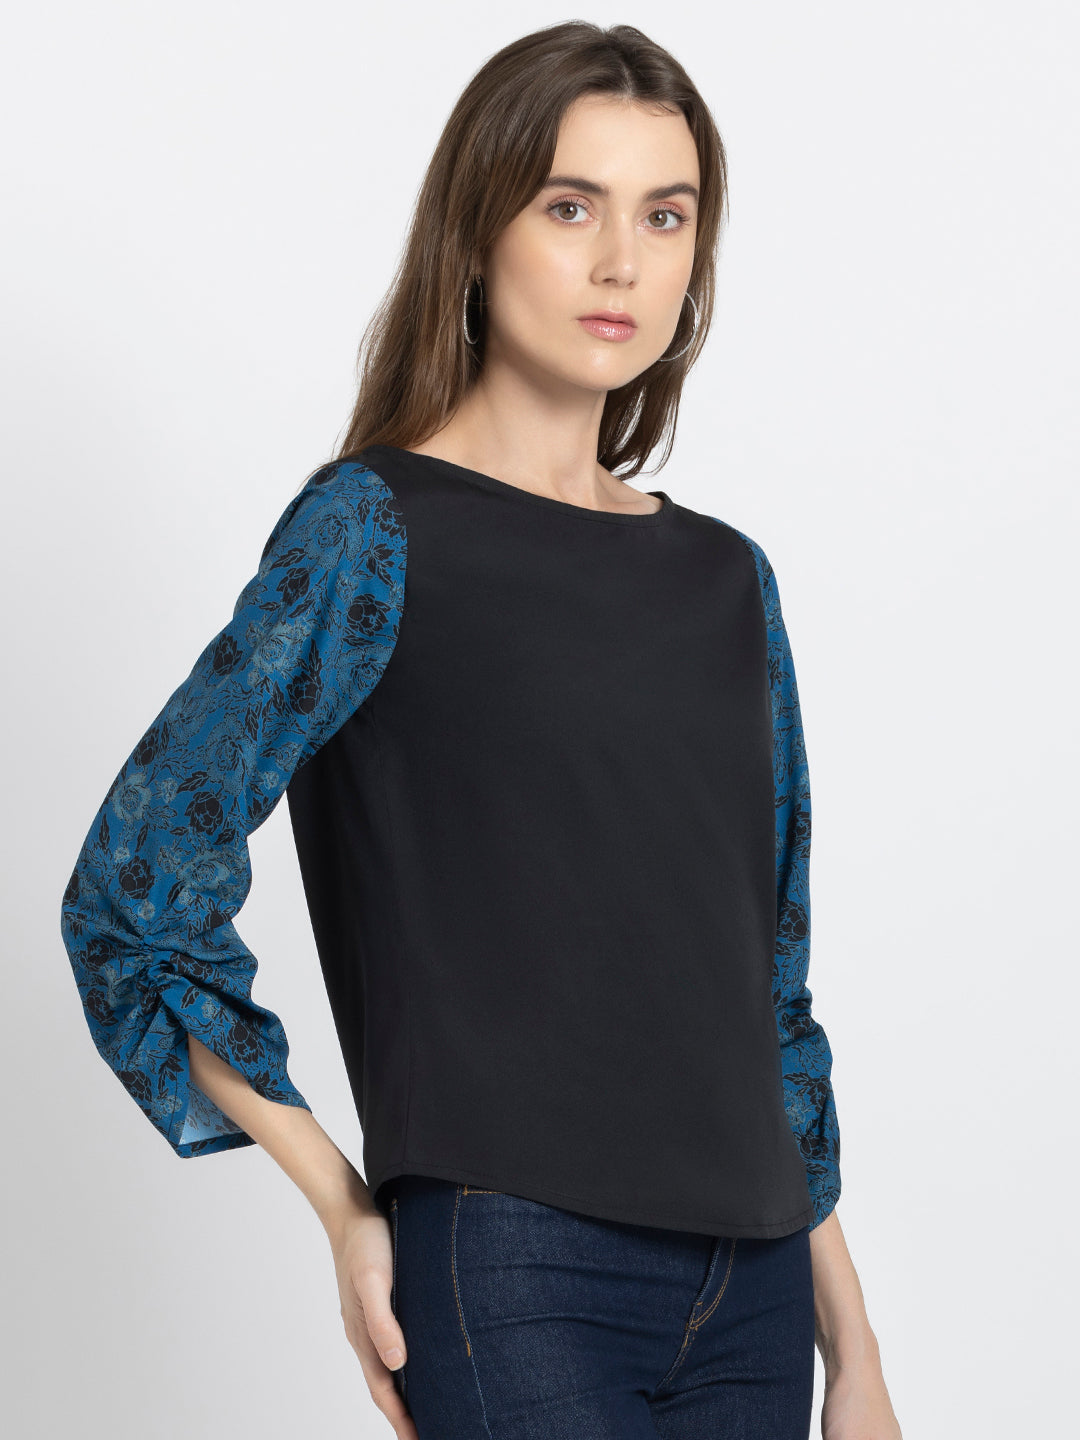 Rowena Top from Shaye , Top for women